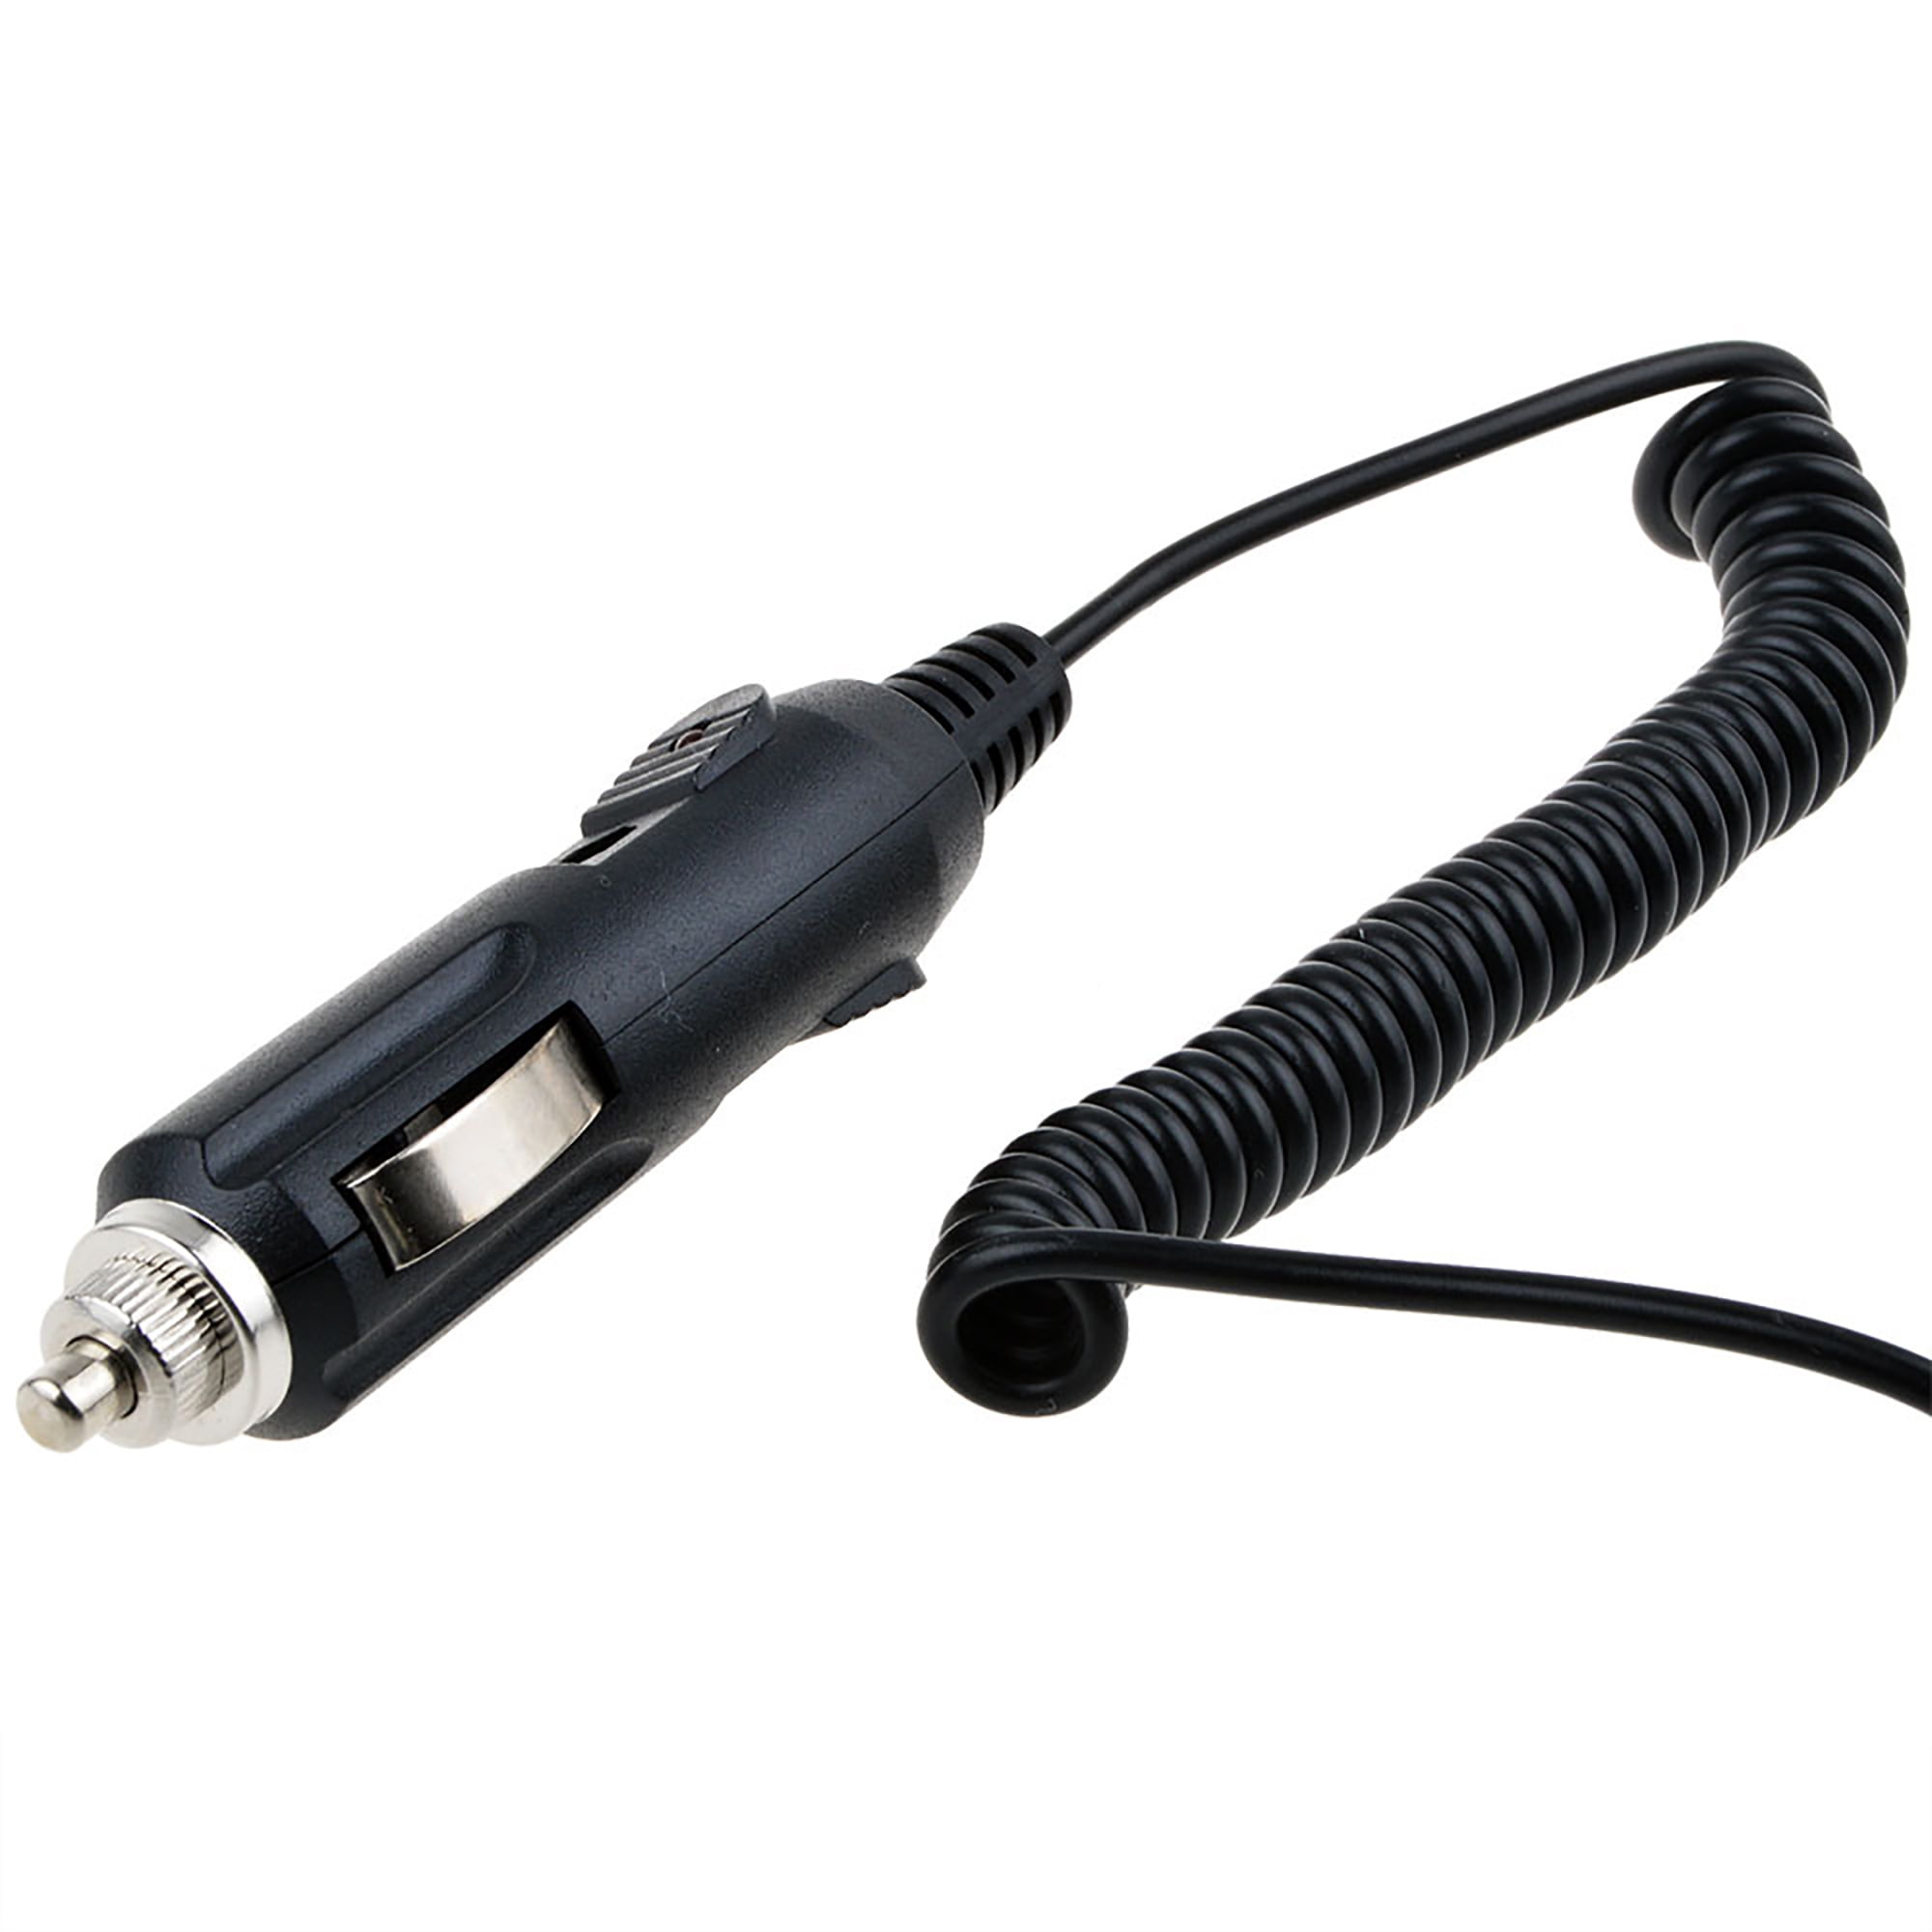 PKPOWER Auto Car Charger Power Cord for Dynex DXP9DVD DX-P9DVD11 9